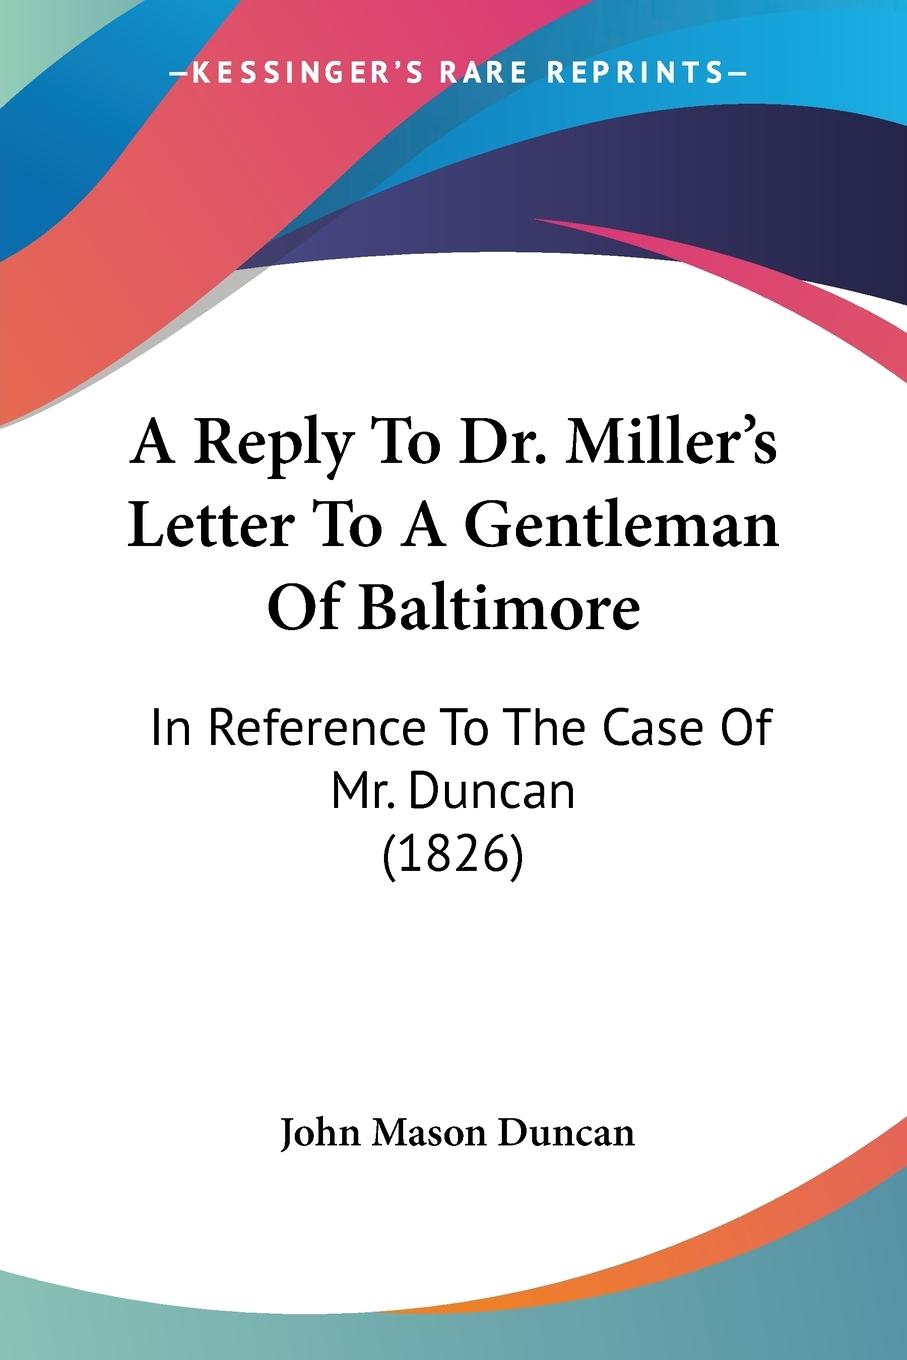 A Reply To Dr. Miller s Letter To A Gentleman Of Baltimore - Duncan, John Mason